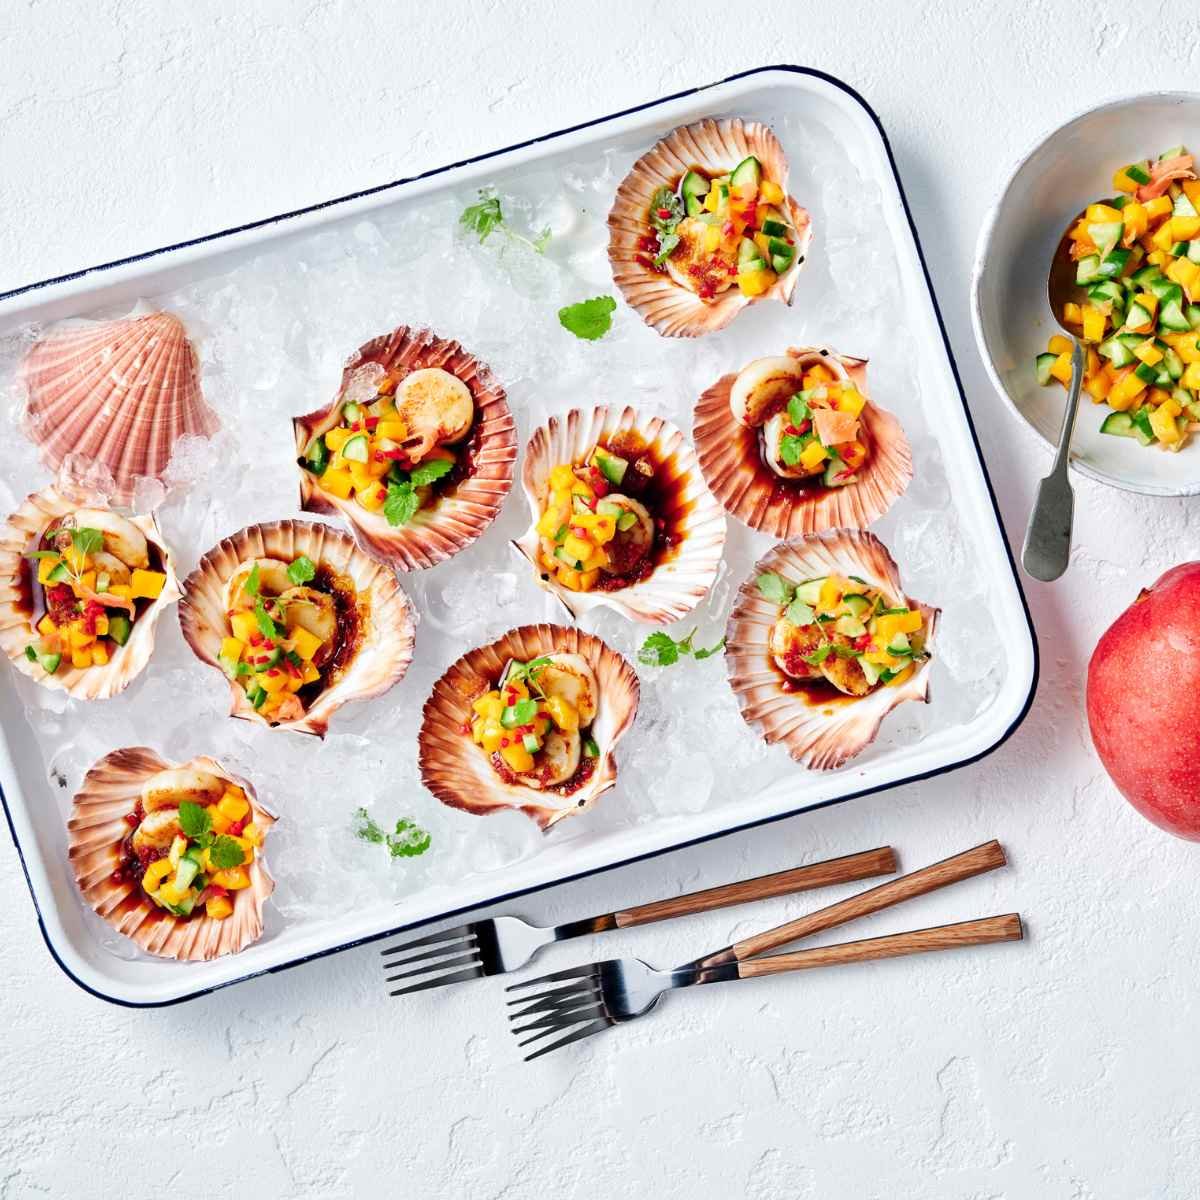 Scarlet Delight_Seared Scallops with Mango and Quke Salsa